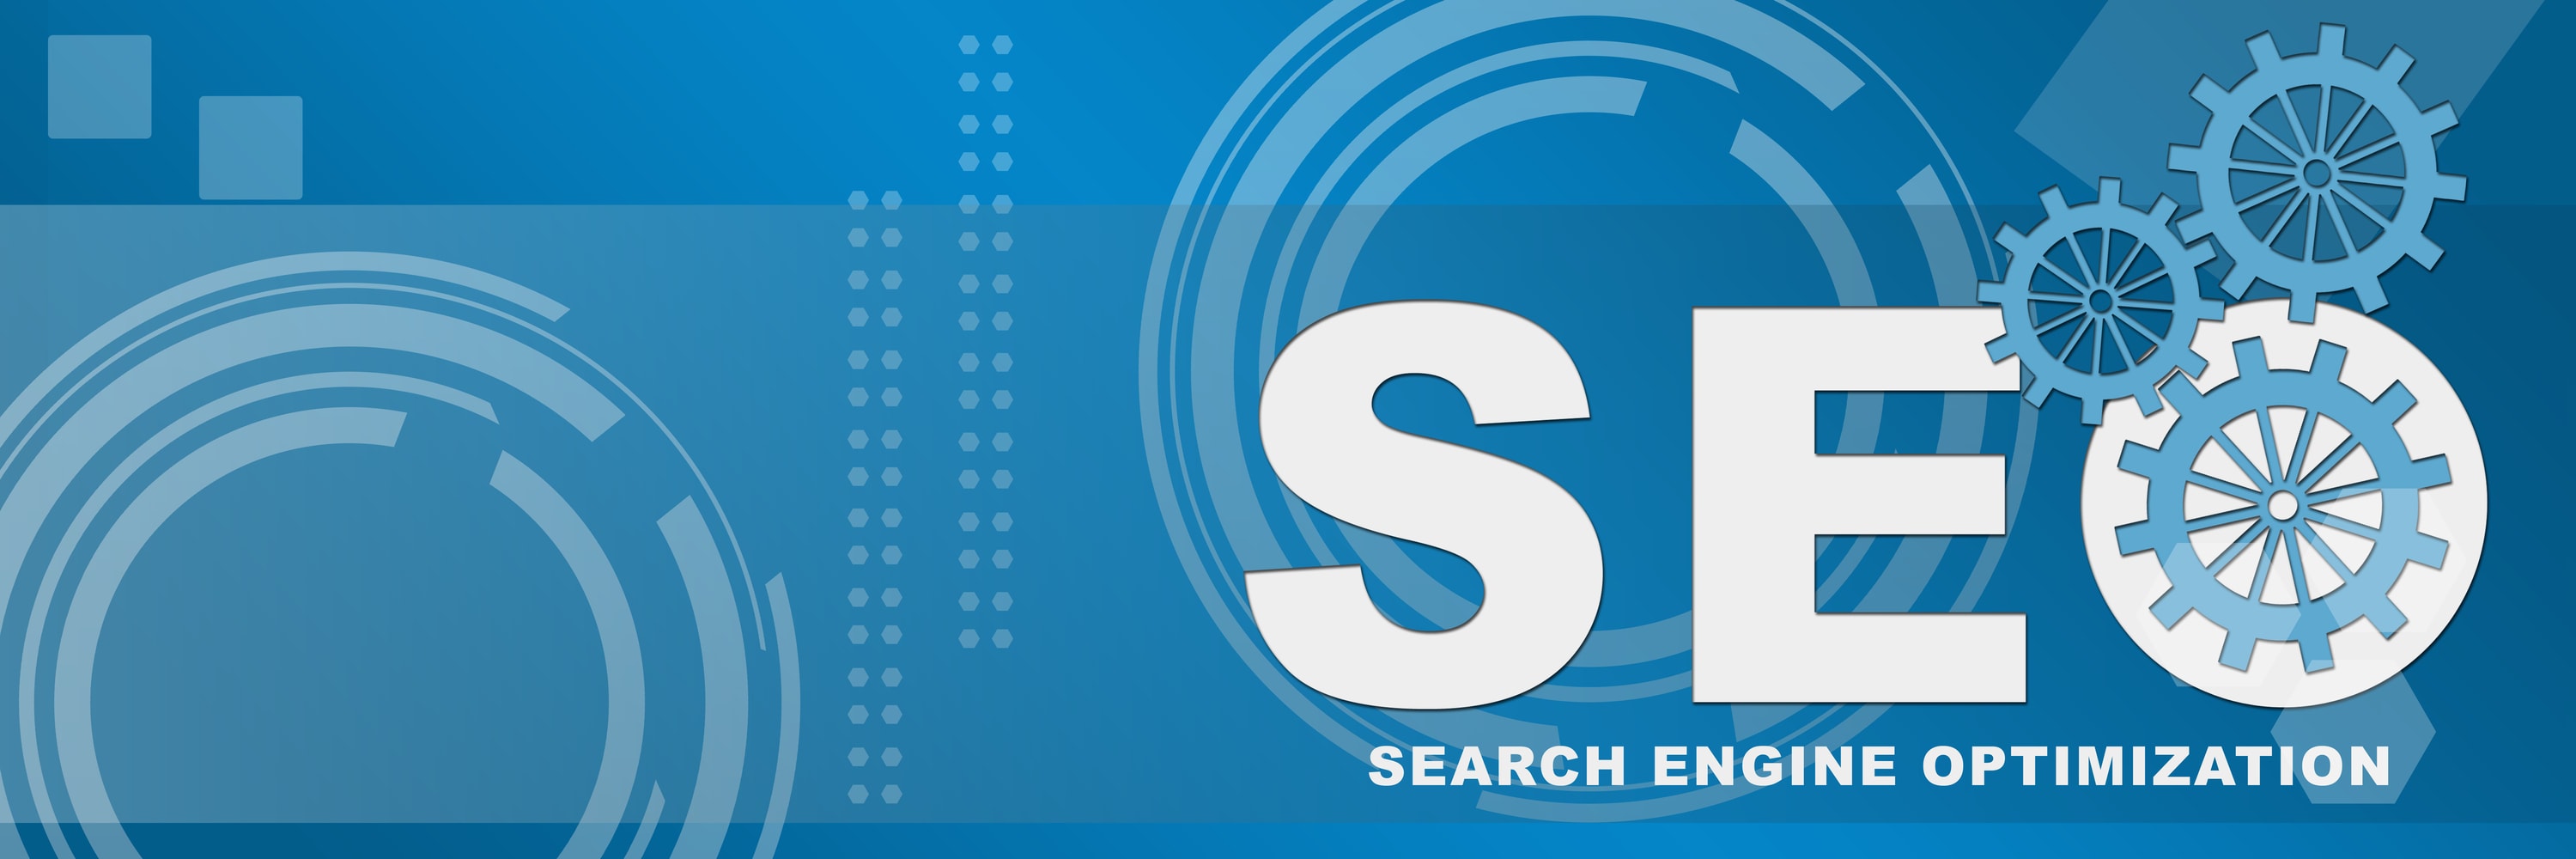 SEO - search engine optimization banner with gears